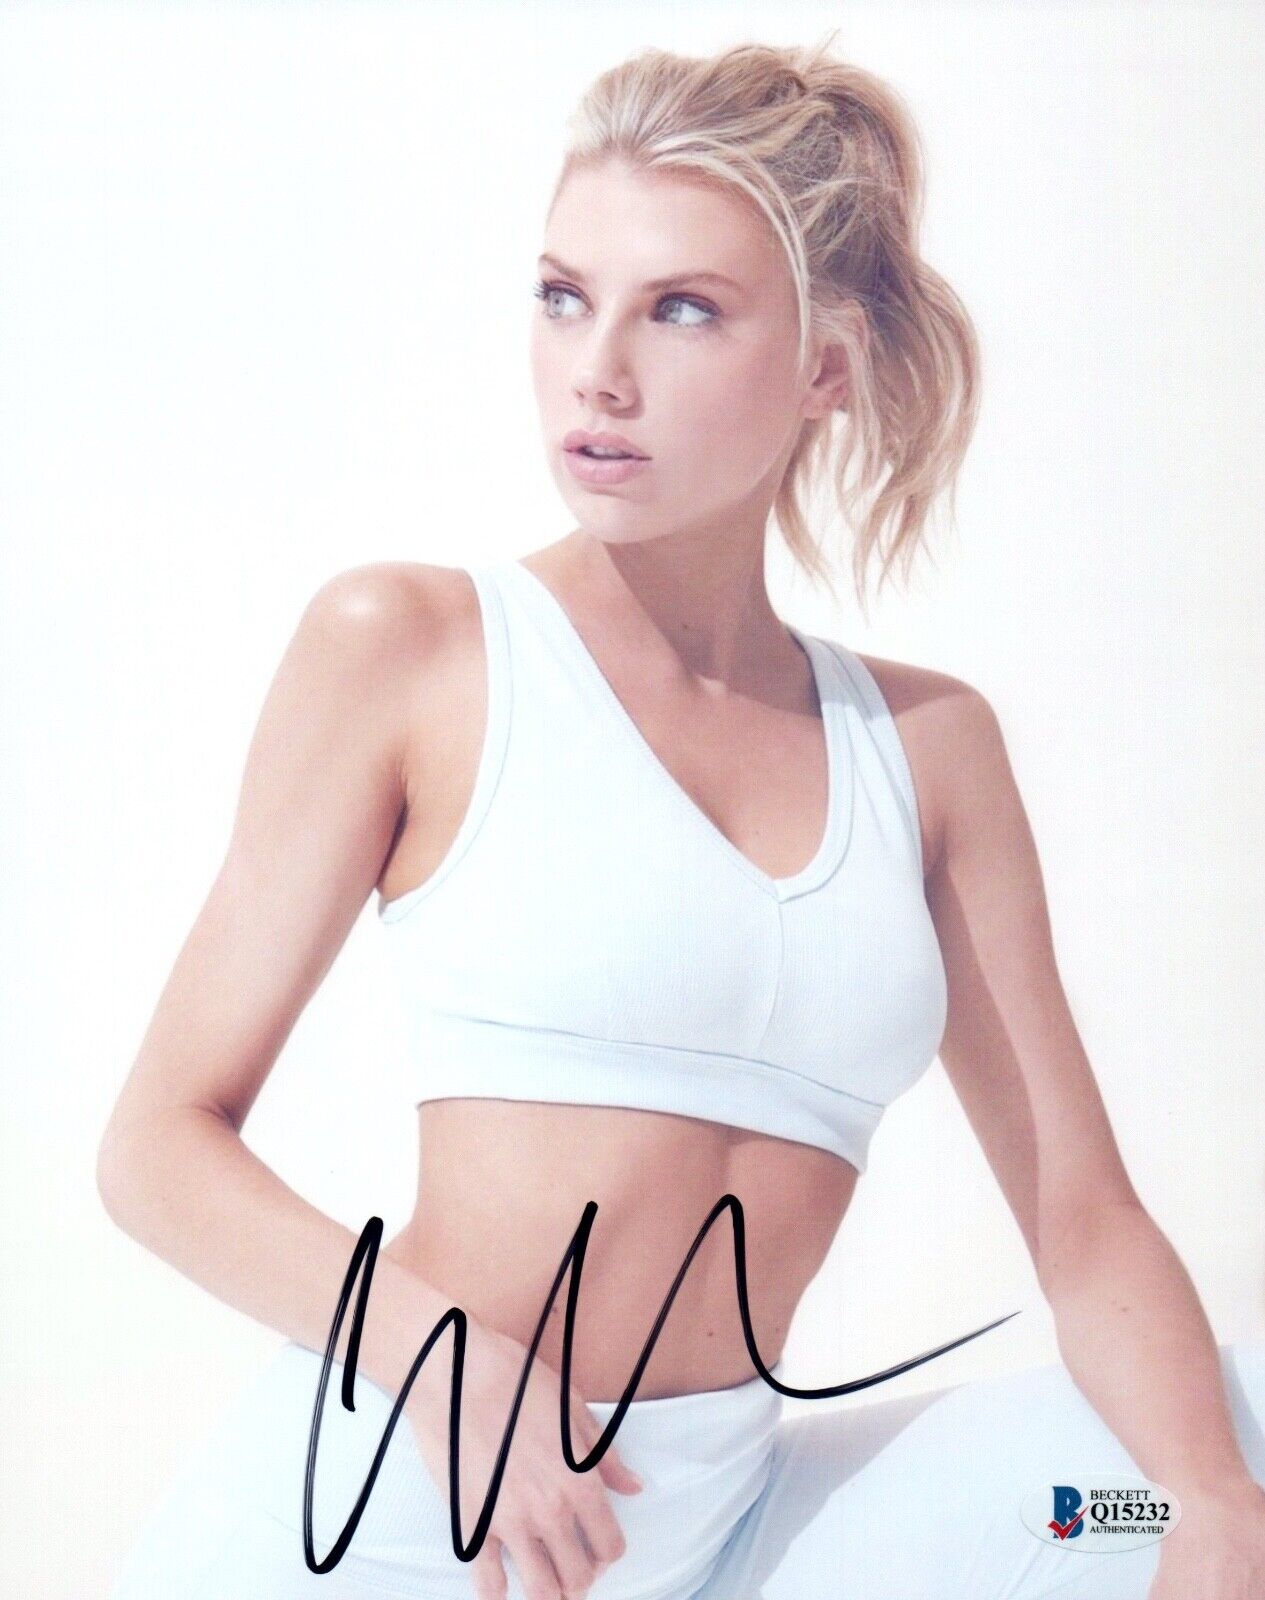 Charlotte McKinney Signed Autographed 8x10 Photo Poster painting Hot Sexy Model Beckett BAS COA